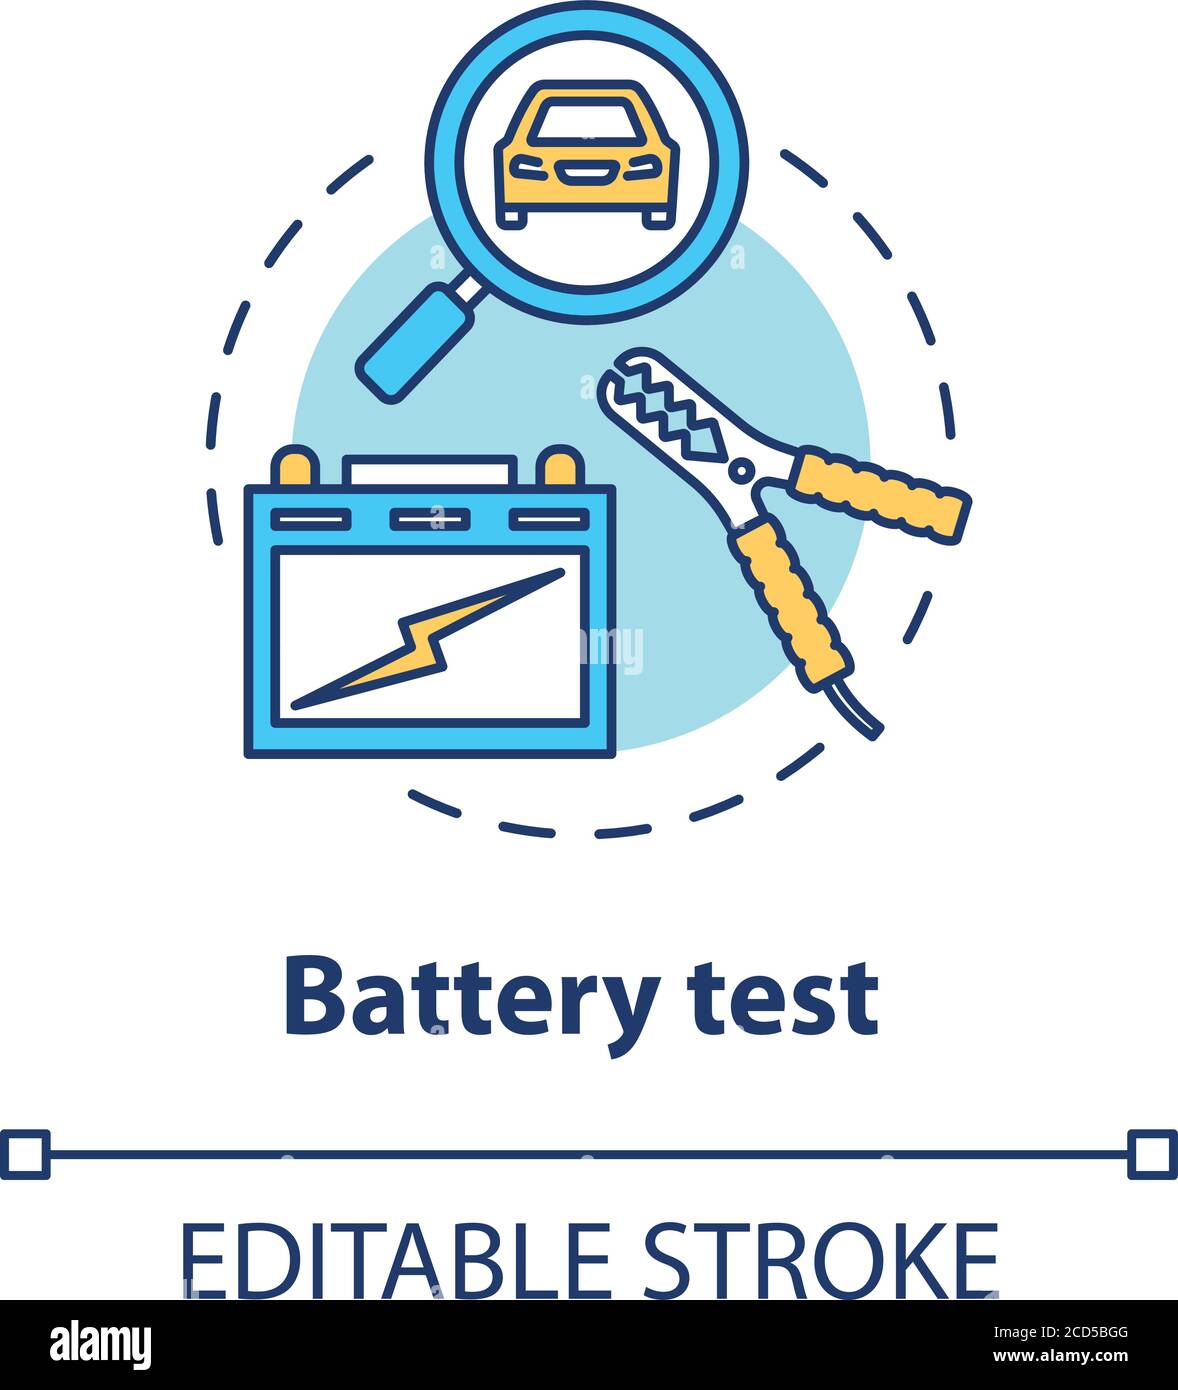 Battery test concept icon Stock Vector